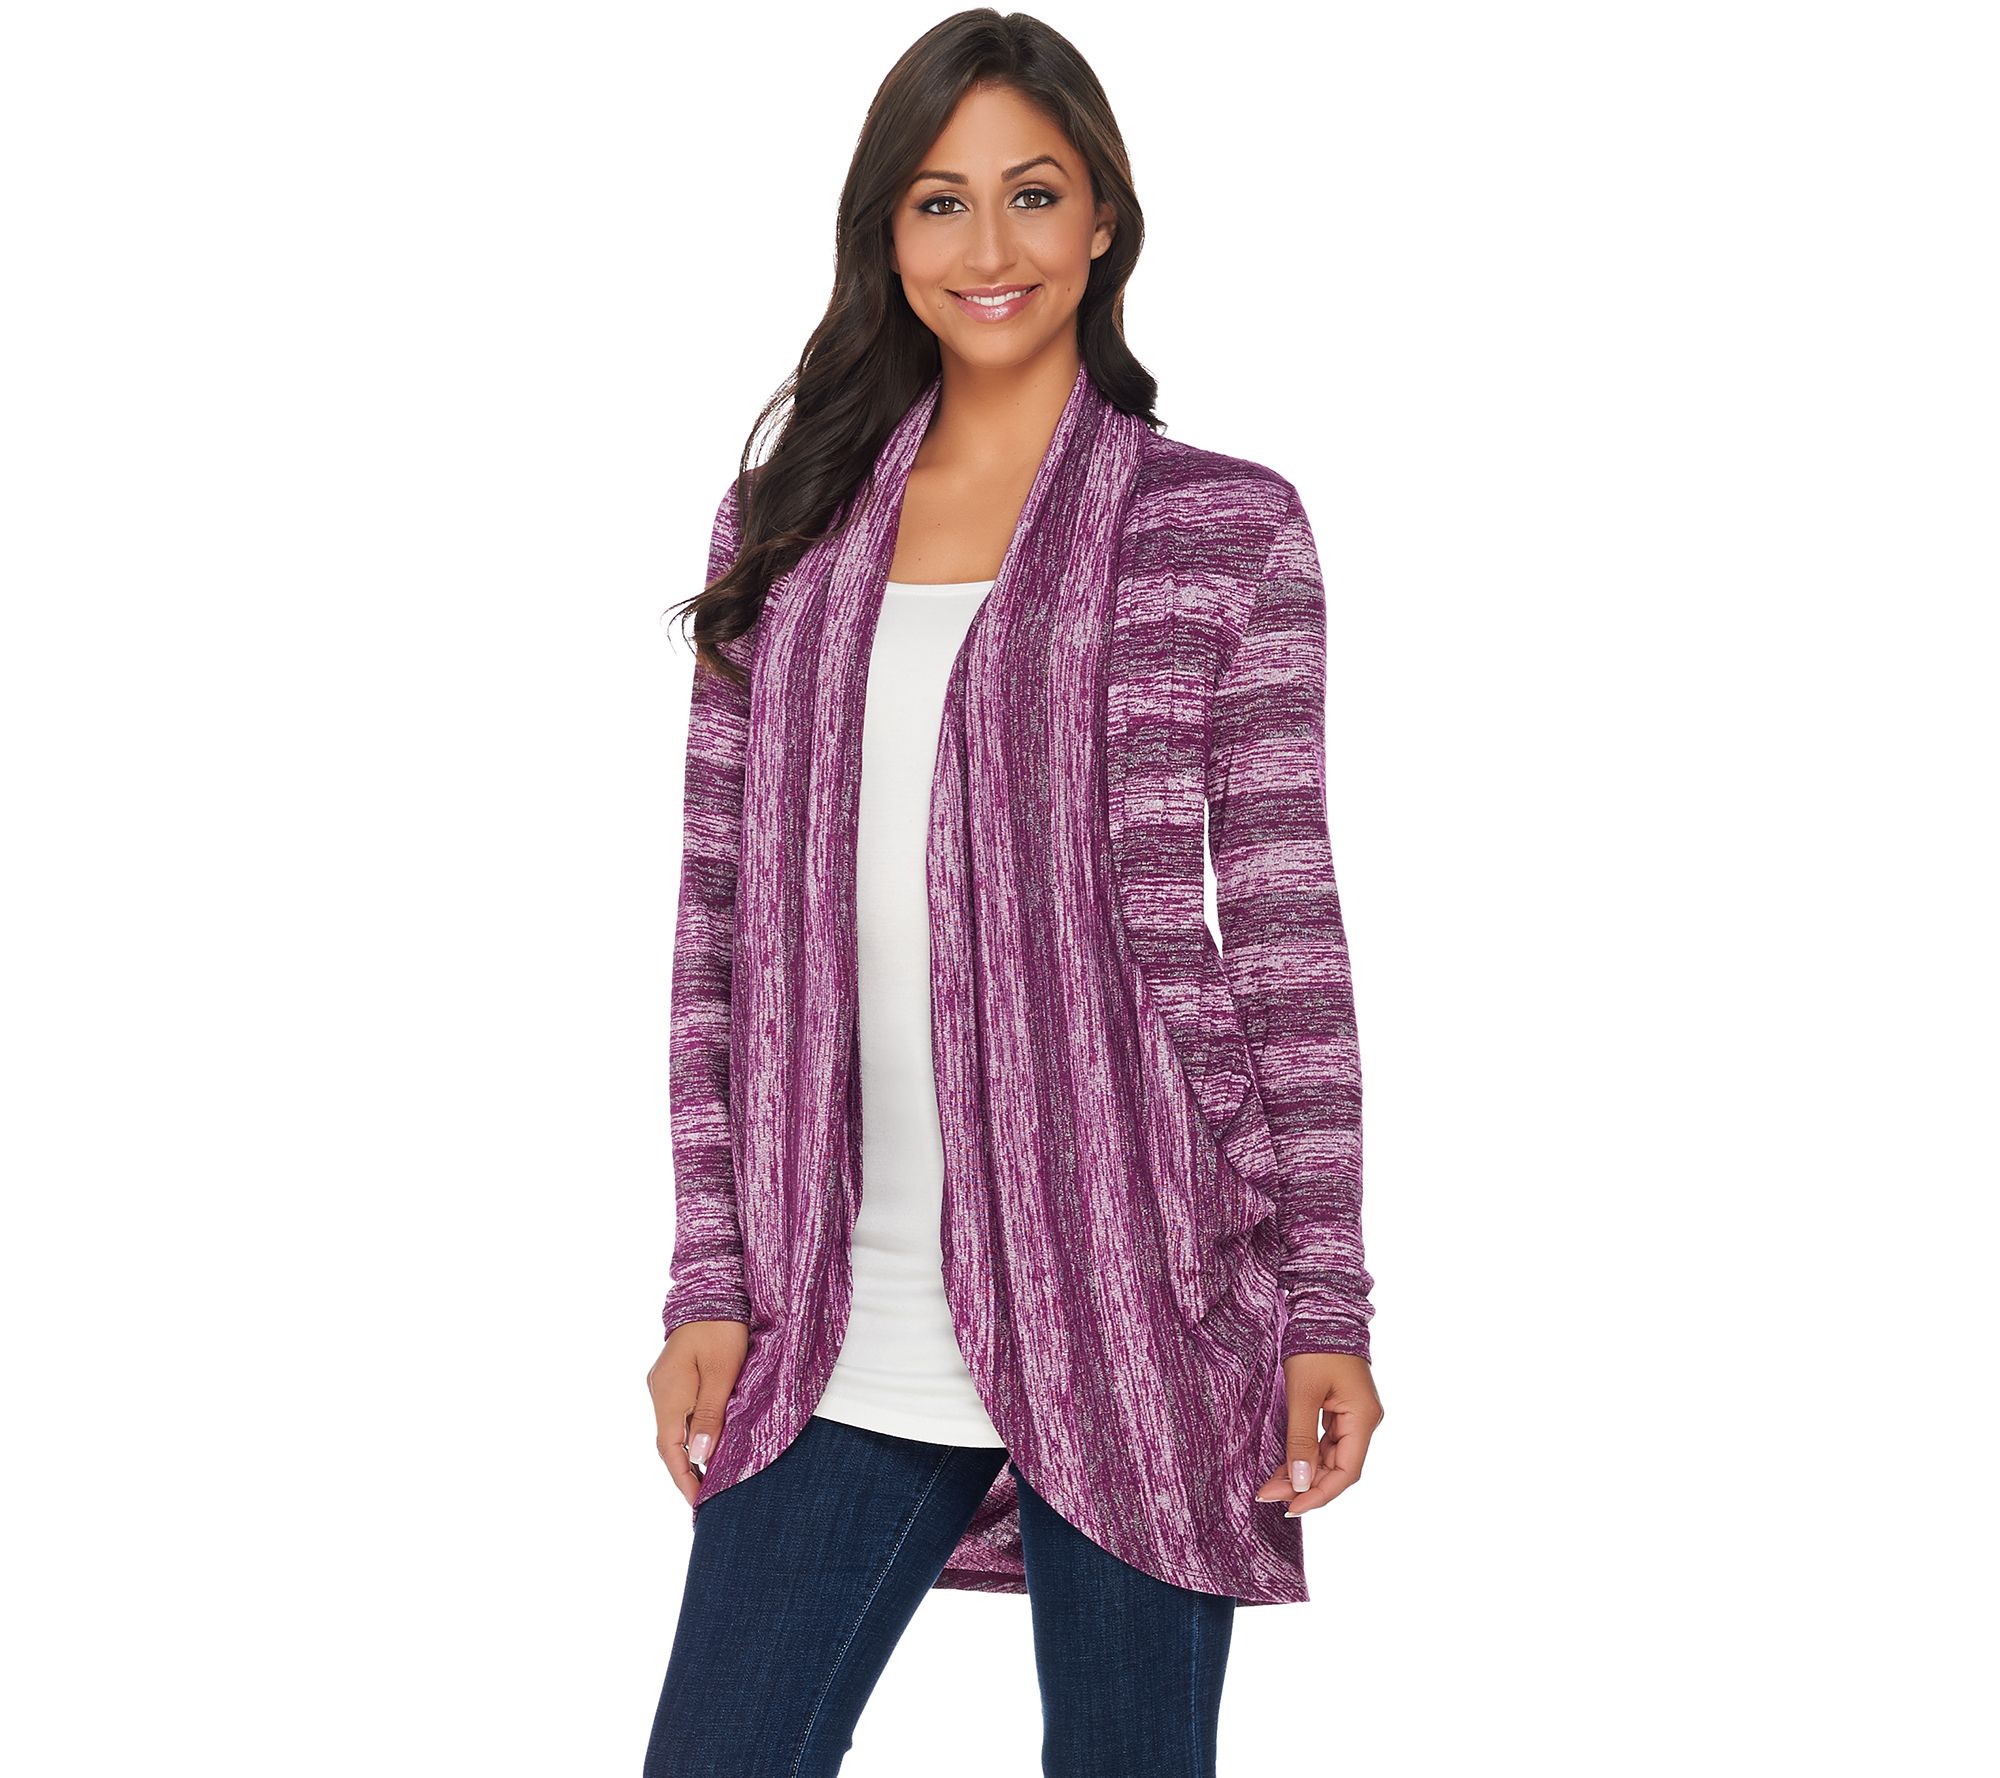 LOGO by Lori Goldstein Sweater Knit Cocoon Cardigan with Pockets - QVC.com